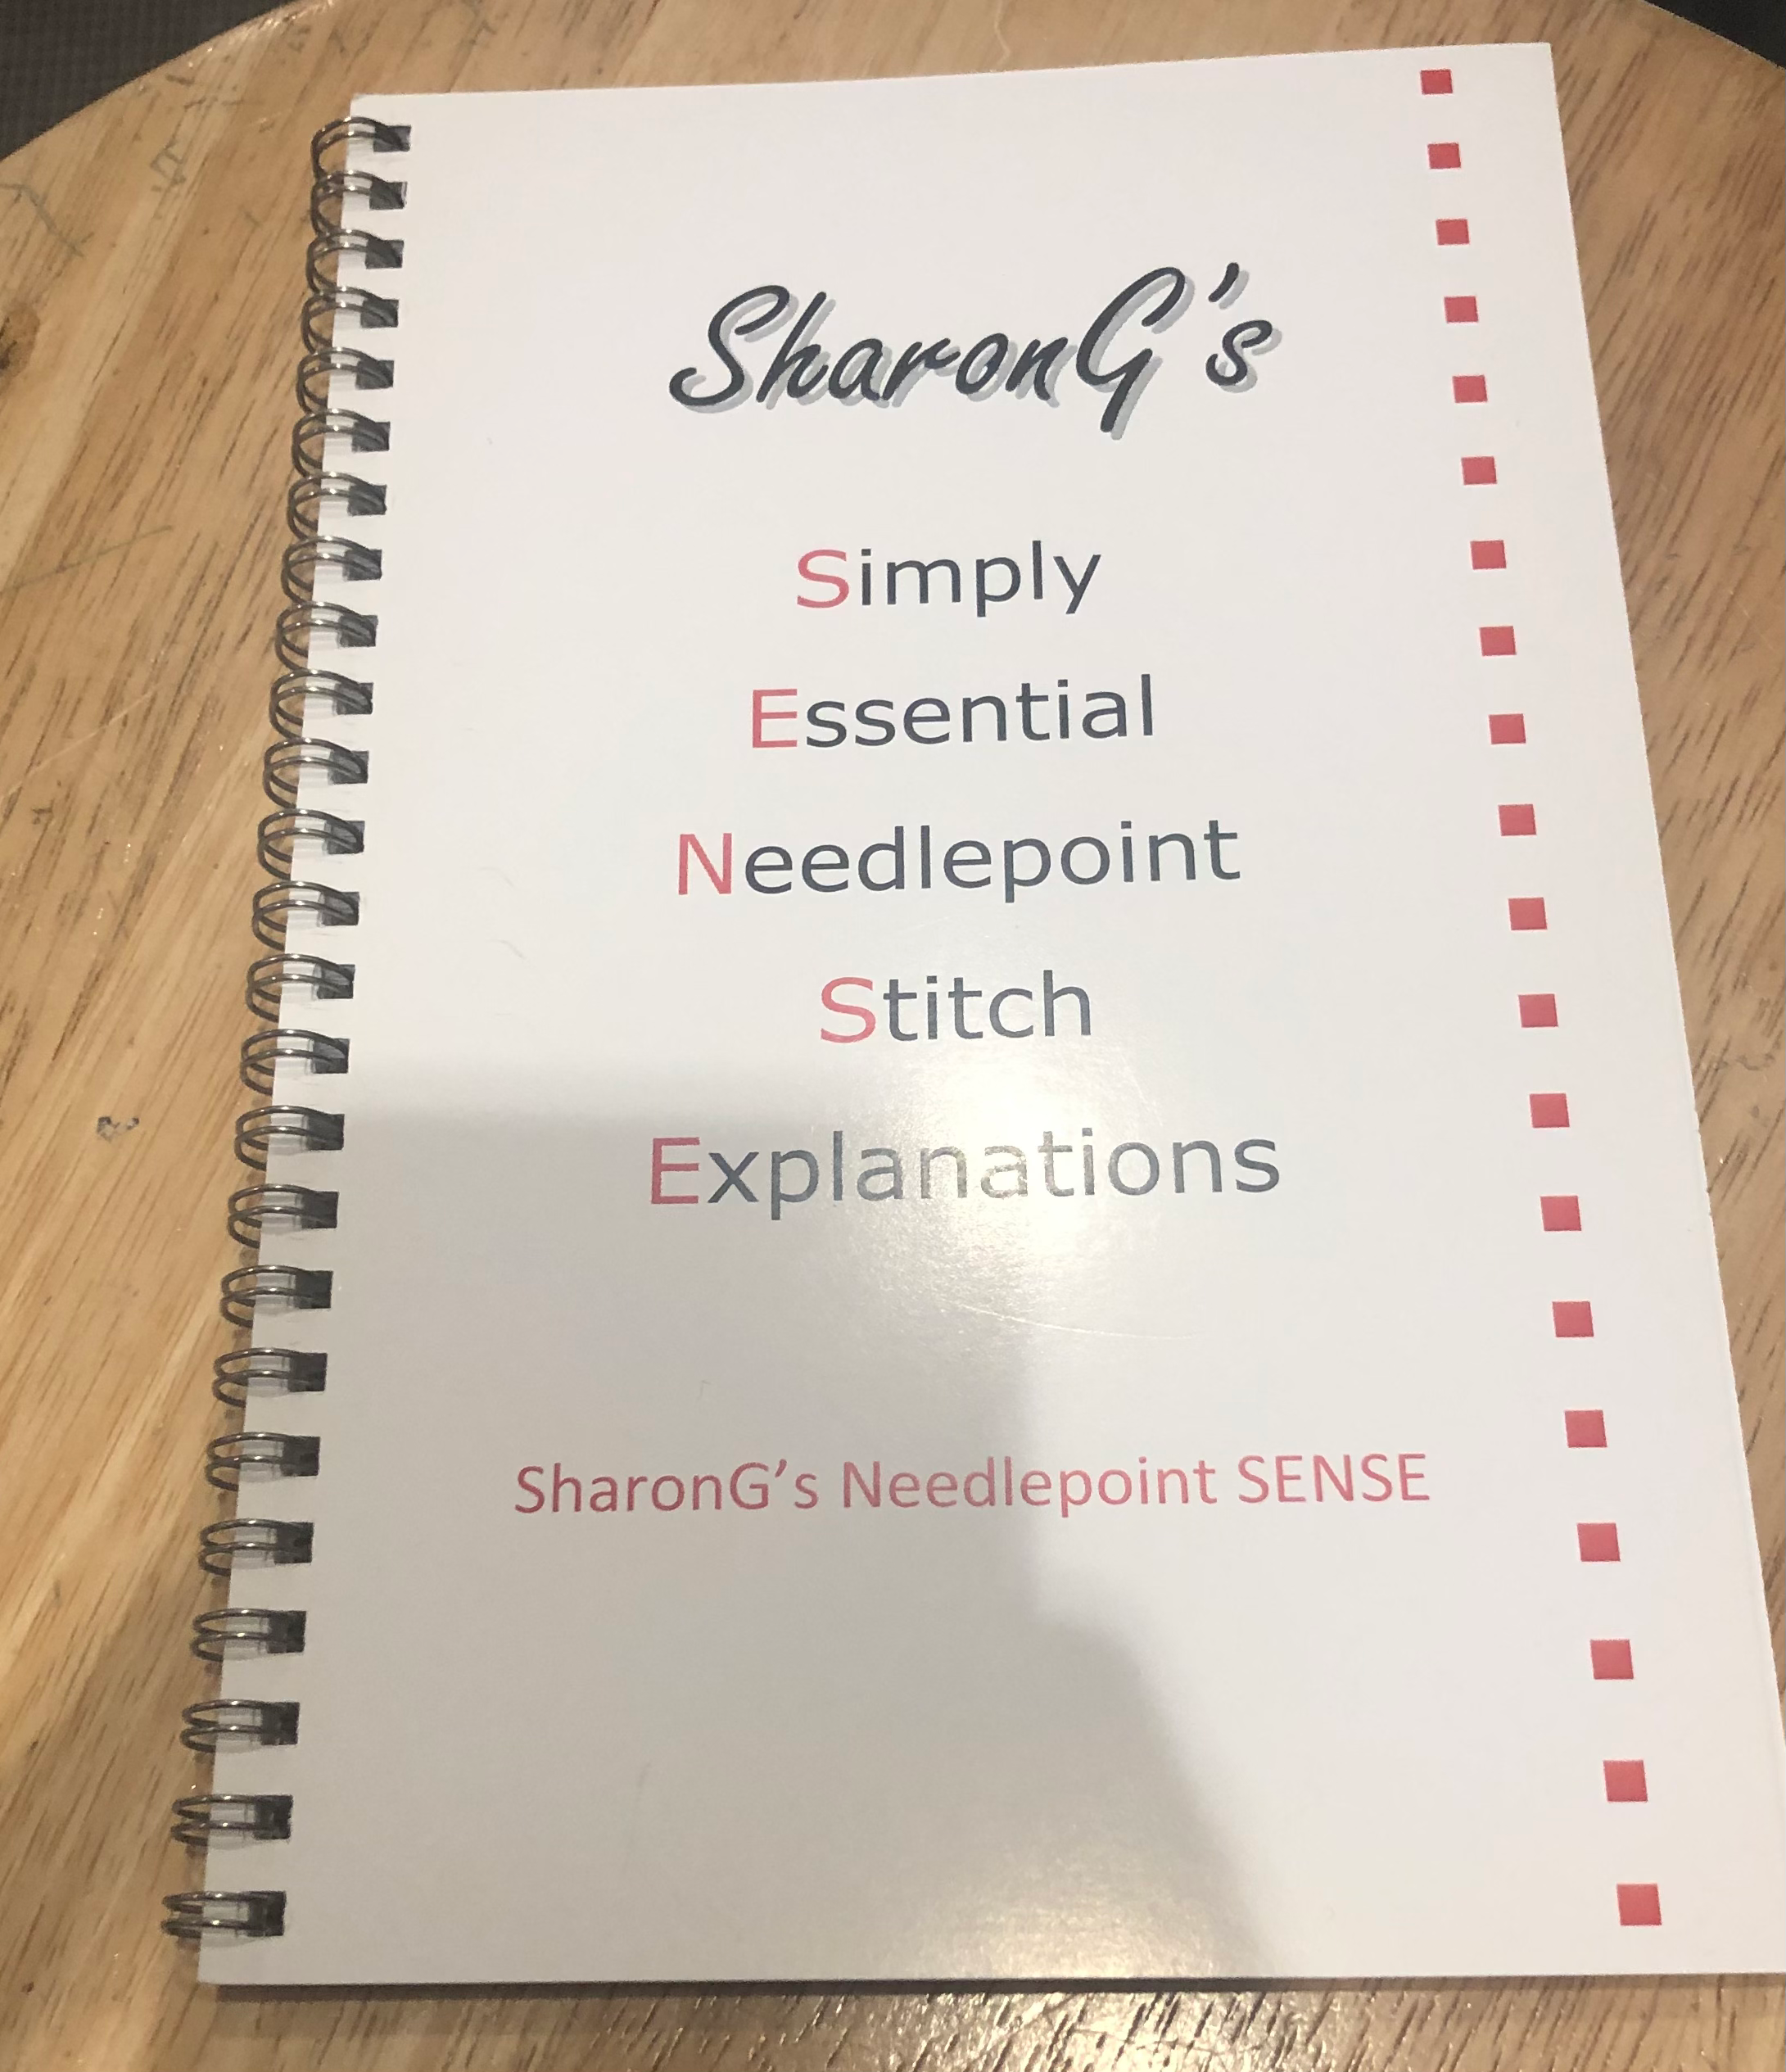 Sharon G’s Simply Essential Needlepoint Stitch Explanations